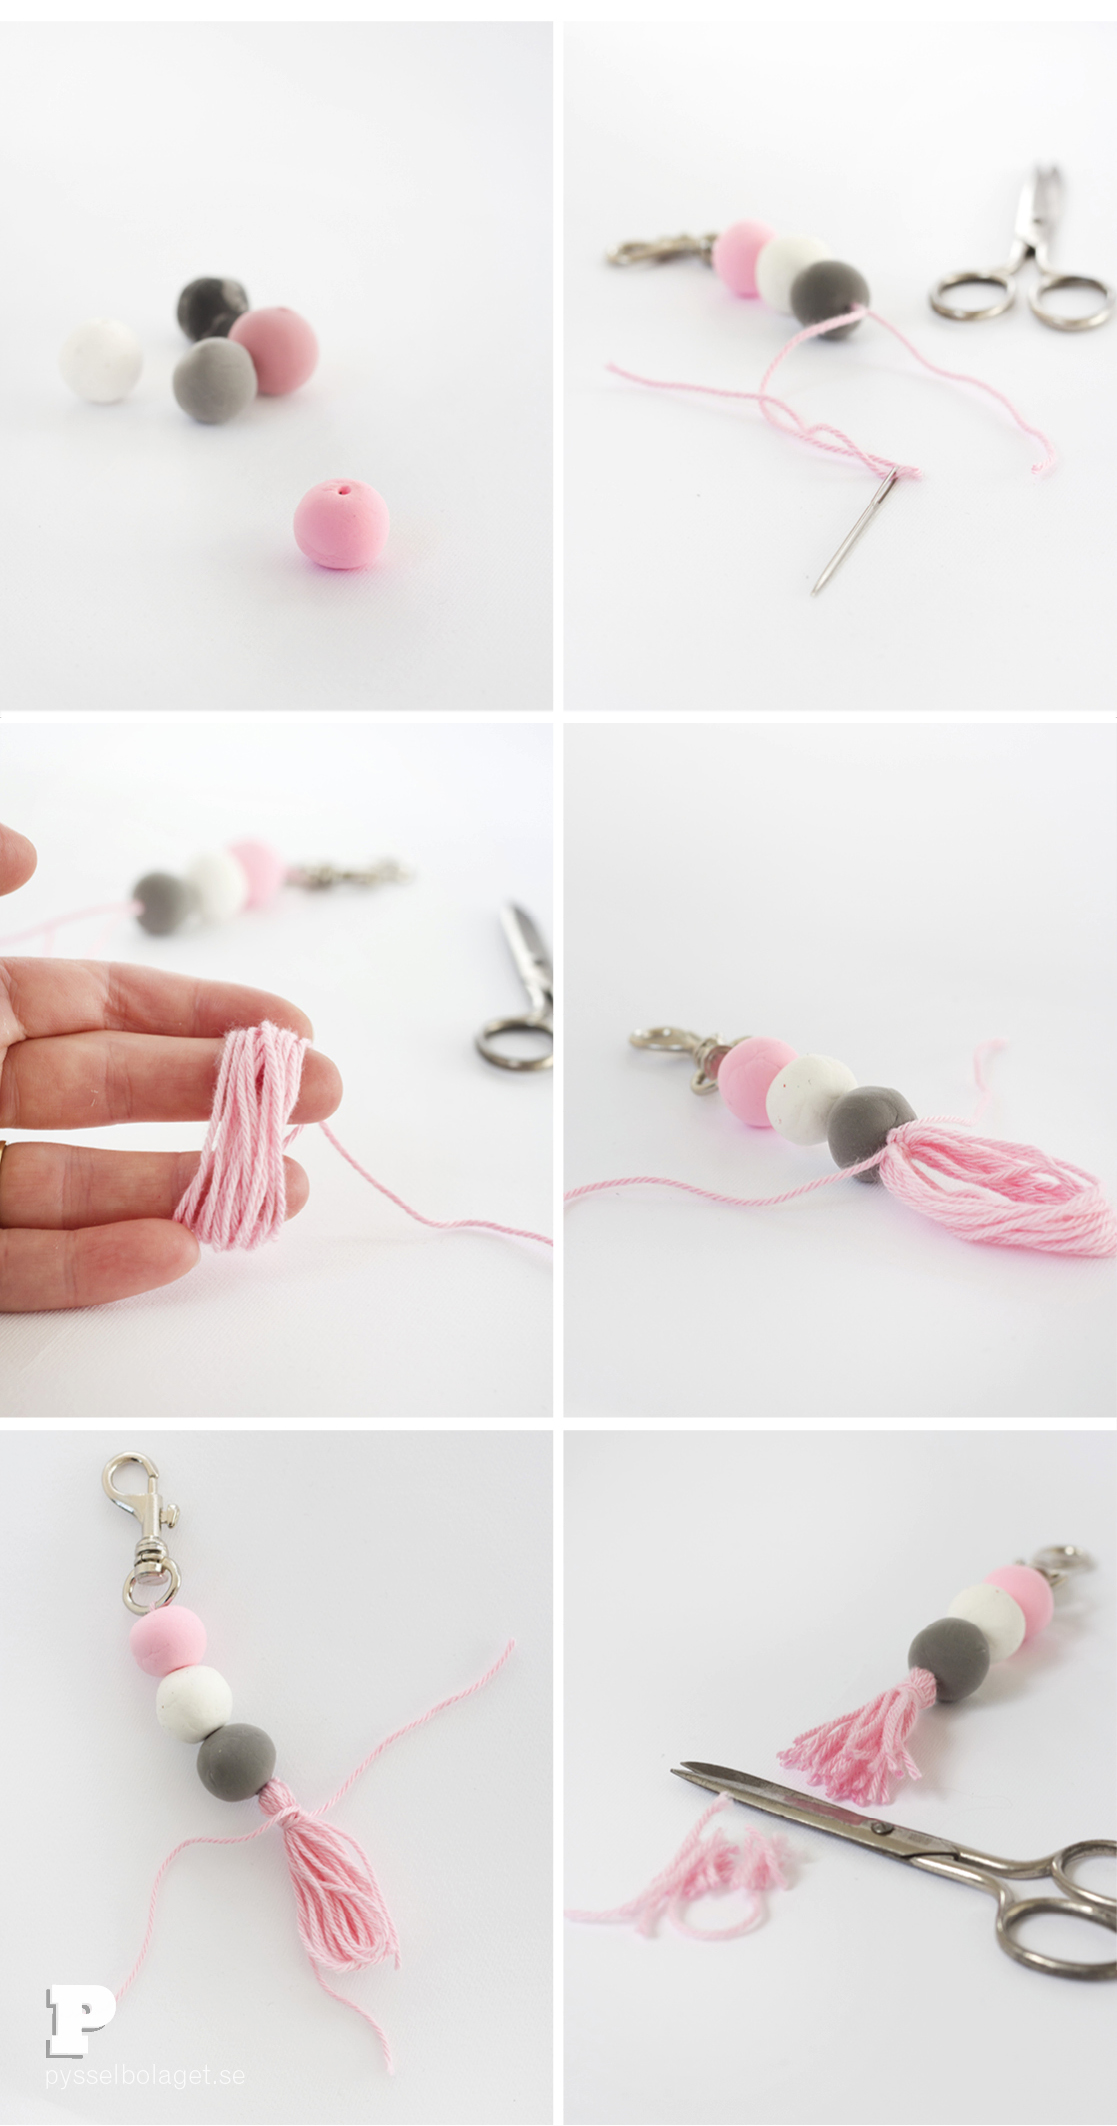 Silk Clay Keyrings by Pysselbolaget